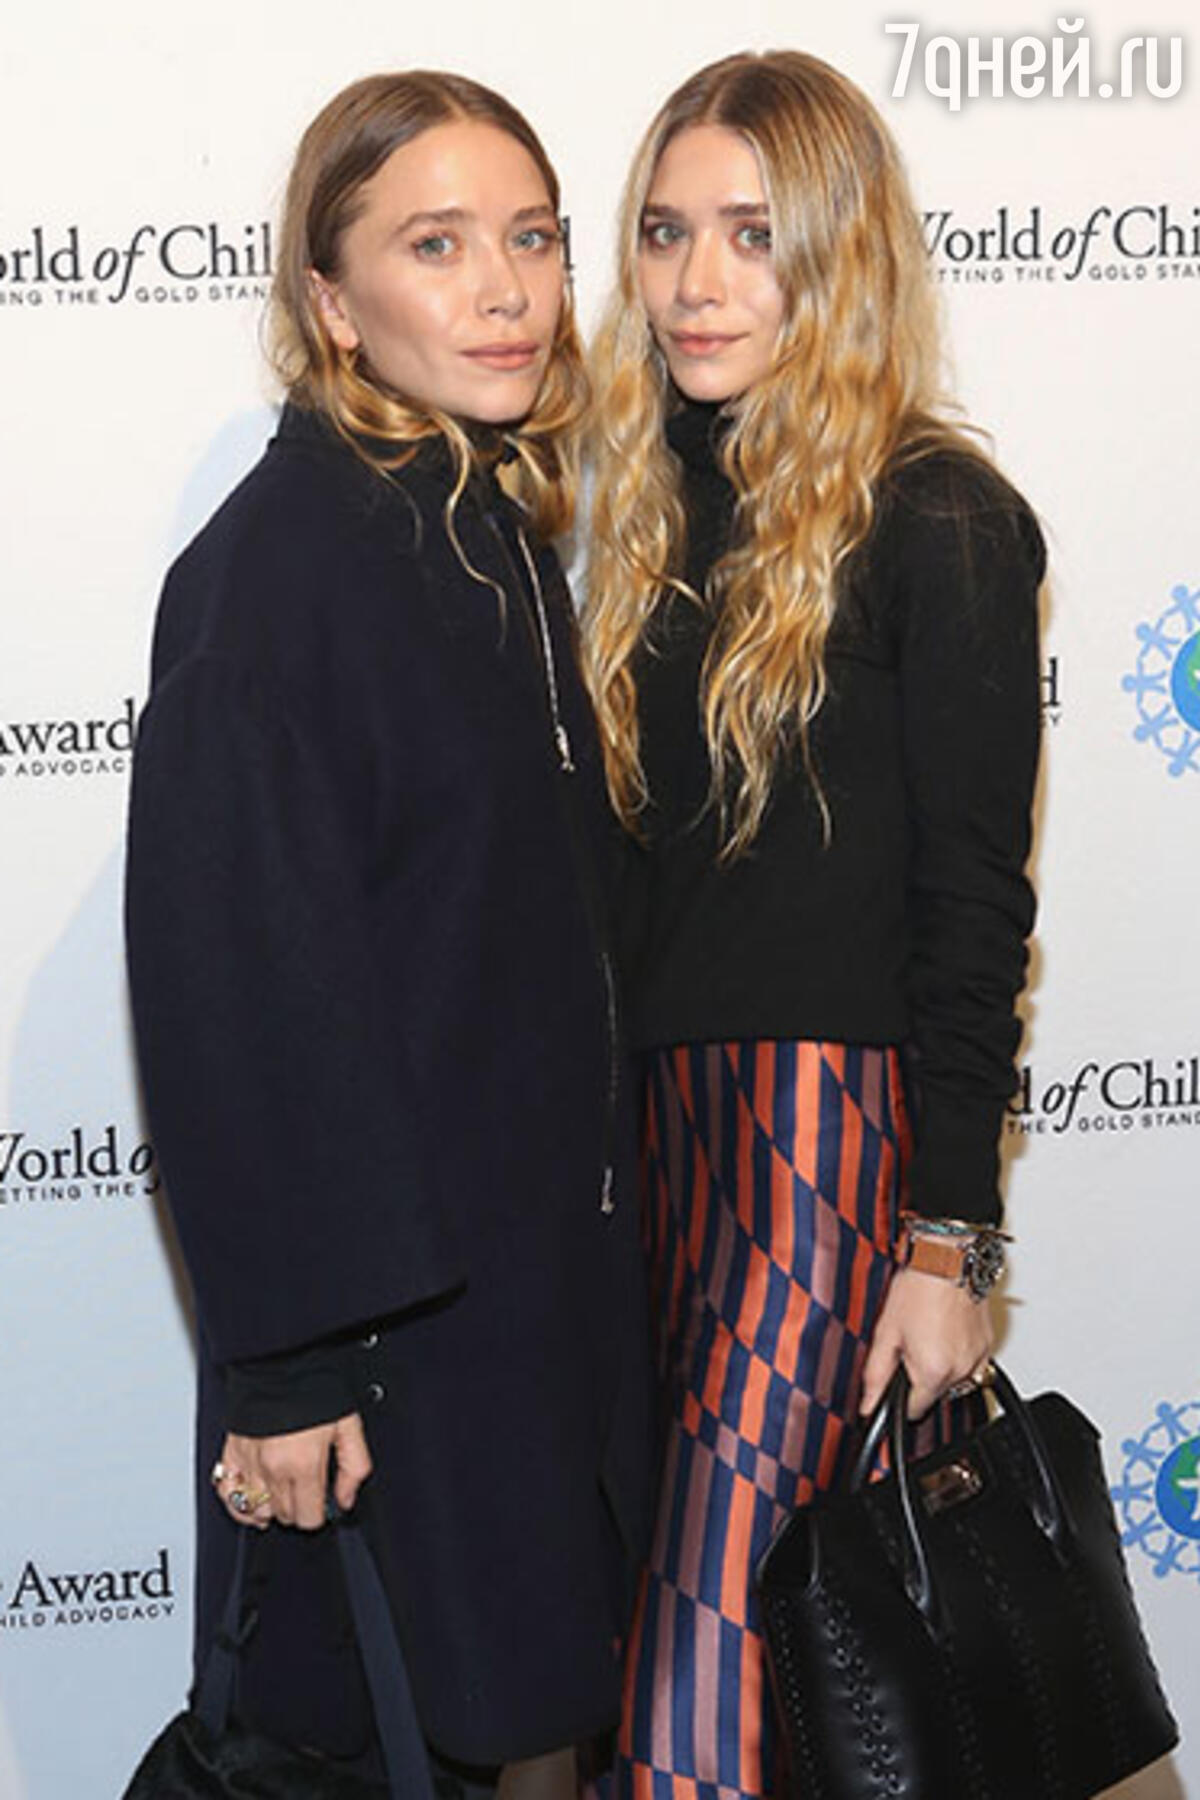 'mary kate and ashley olsen twins' Search - заточка63.рф